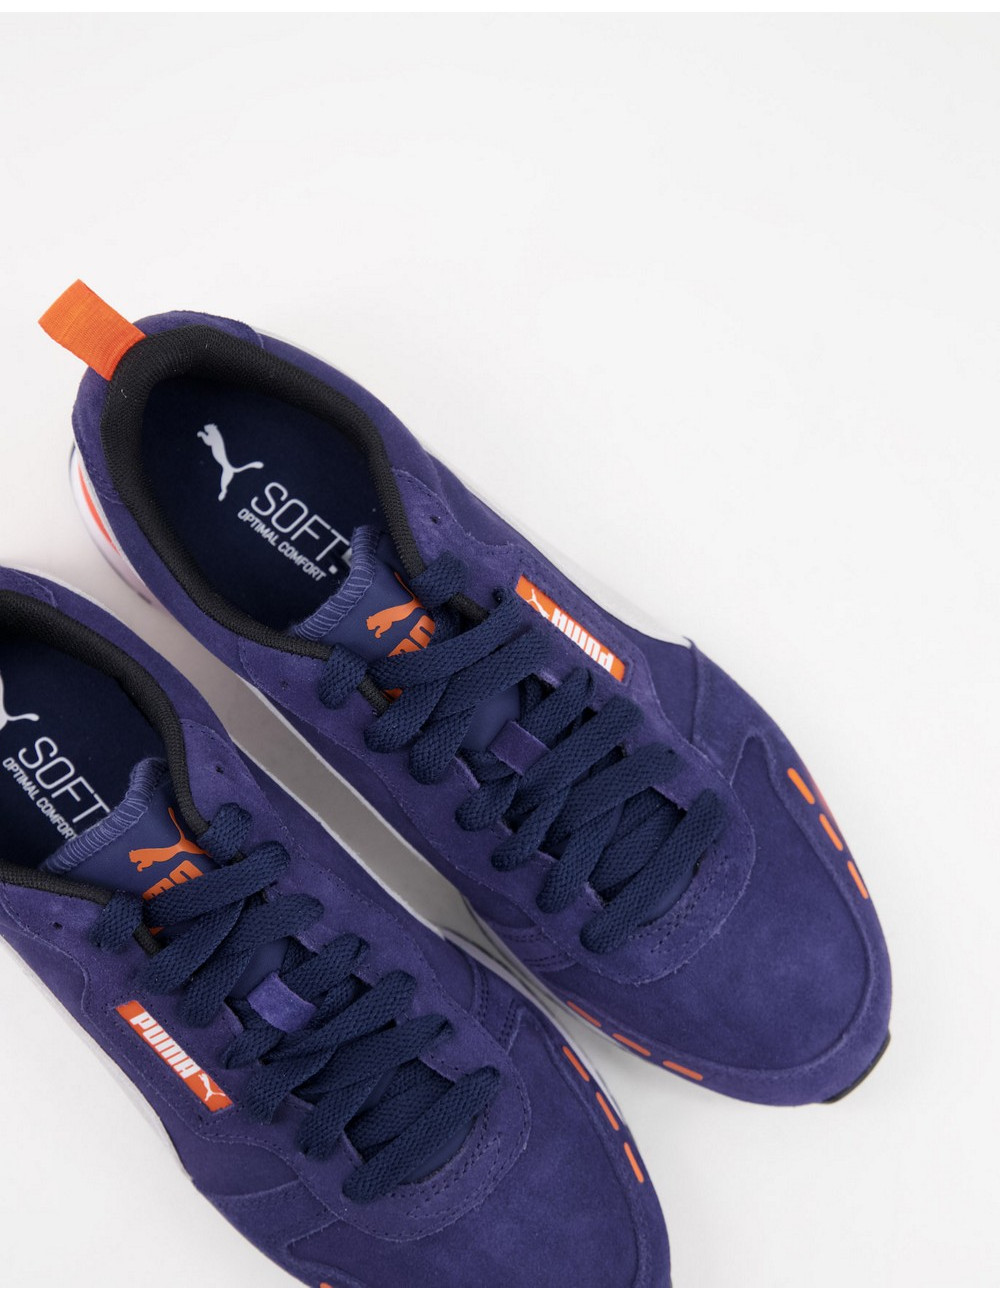 Puma R78 SD trainers in navy